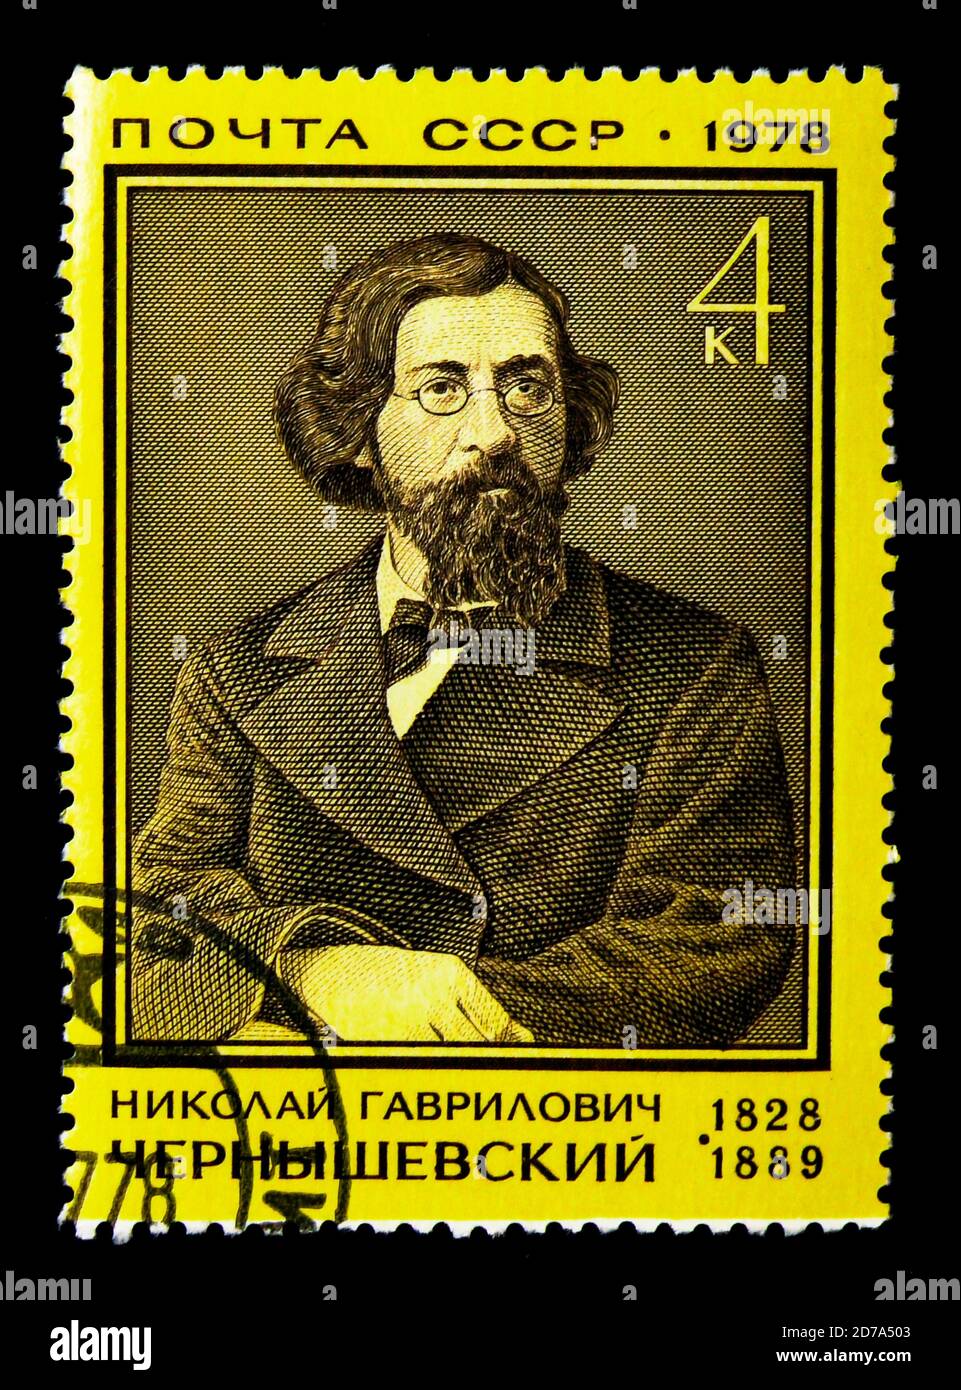 MOSCOW, RUSSIA - NOVEMBER 26, 2017: A stamp printed in USSR (Russia) devoted to 150th Birth Anniversary of N.G. Chernyshevsky, circa 1978 Stock Photo